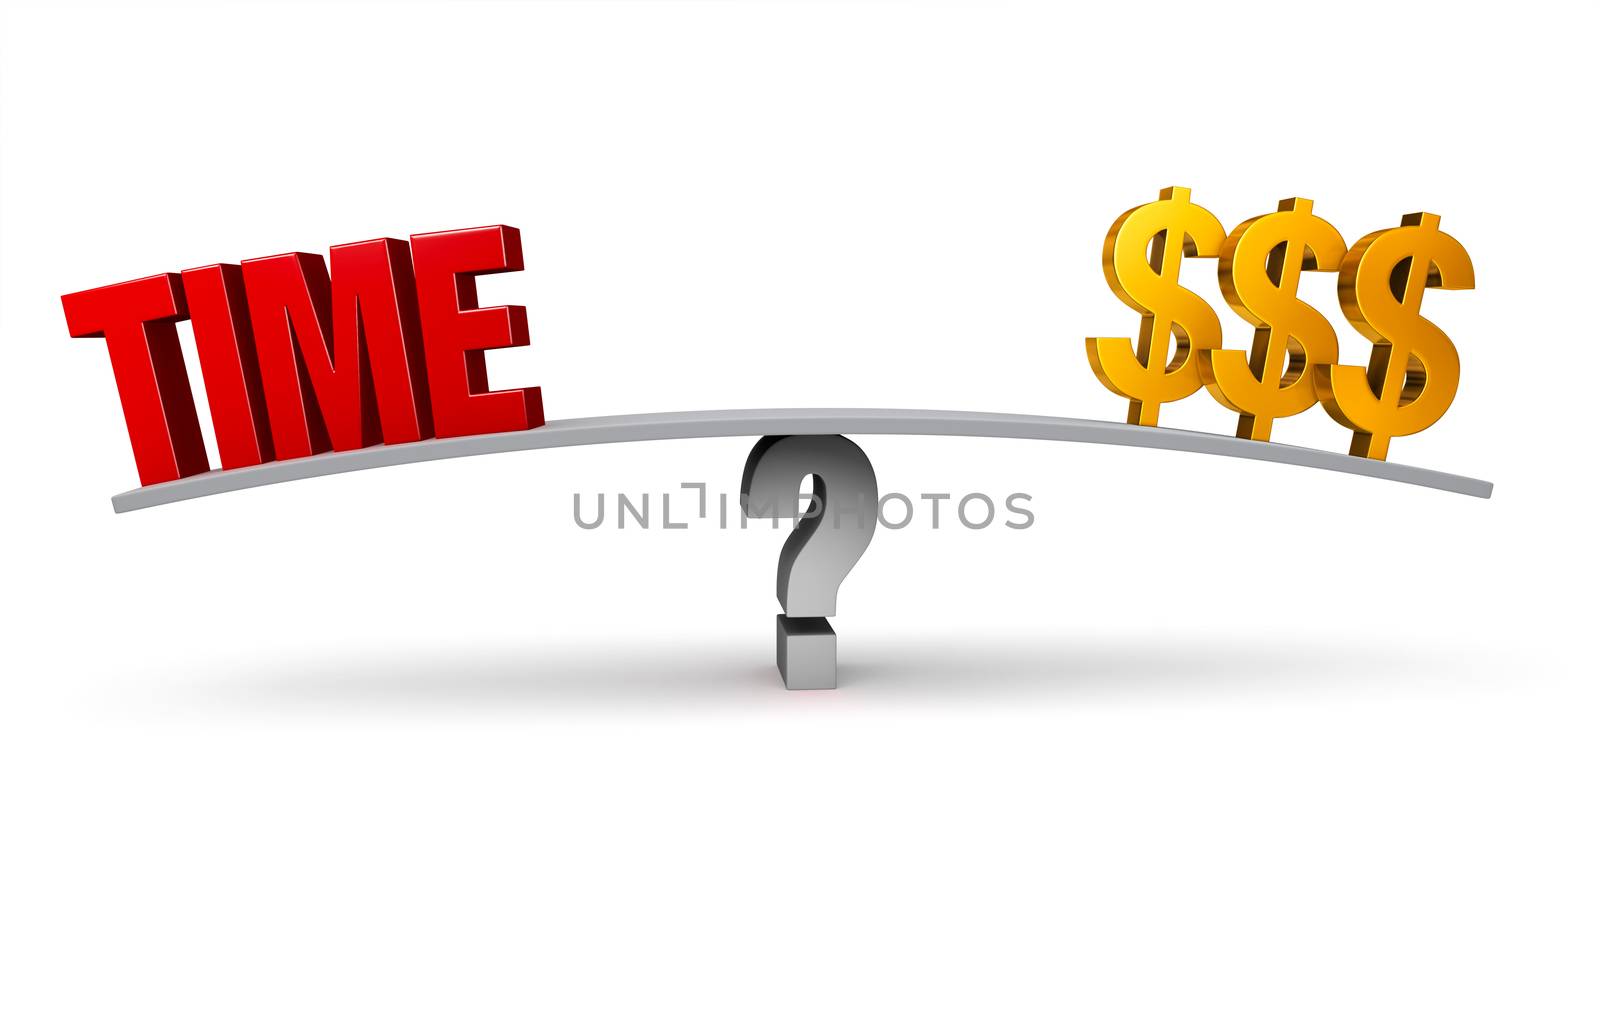 A bright, red "TIME" and three gold dollar signs sit on opposite ends of a gray board balanced on a gray question mark. Isolated on white.